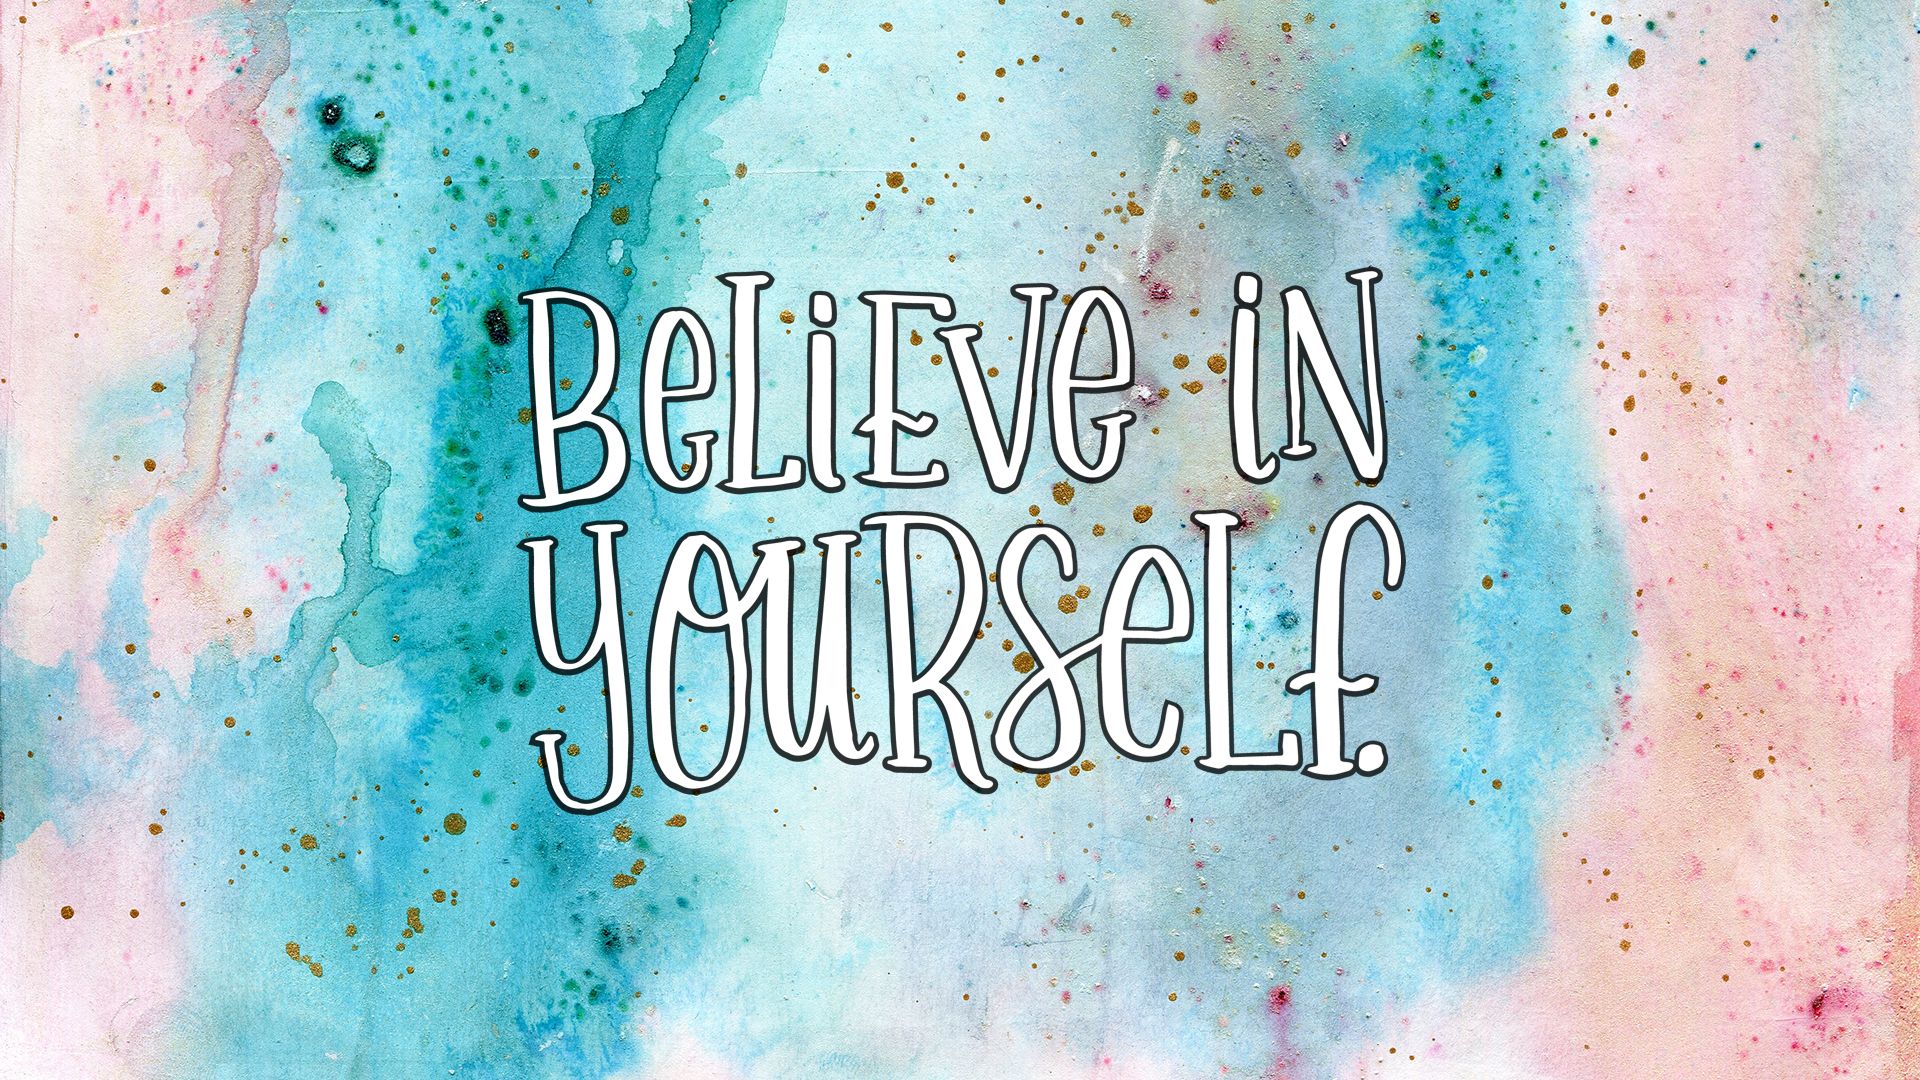 inspirational free wallpapers,text,font,watercolor paint,turquoise,graphic design